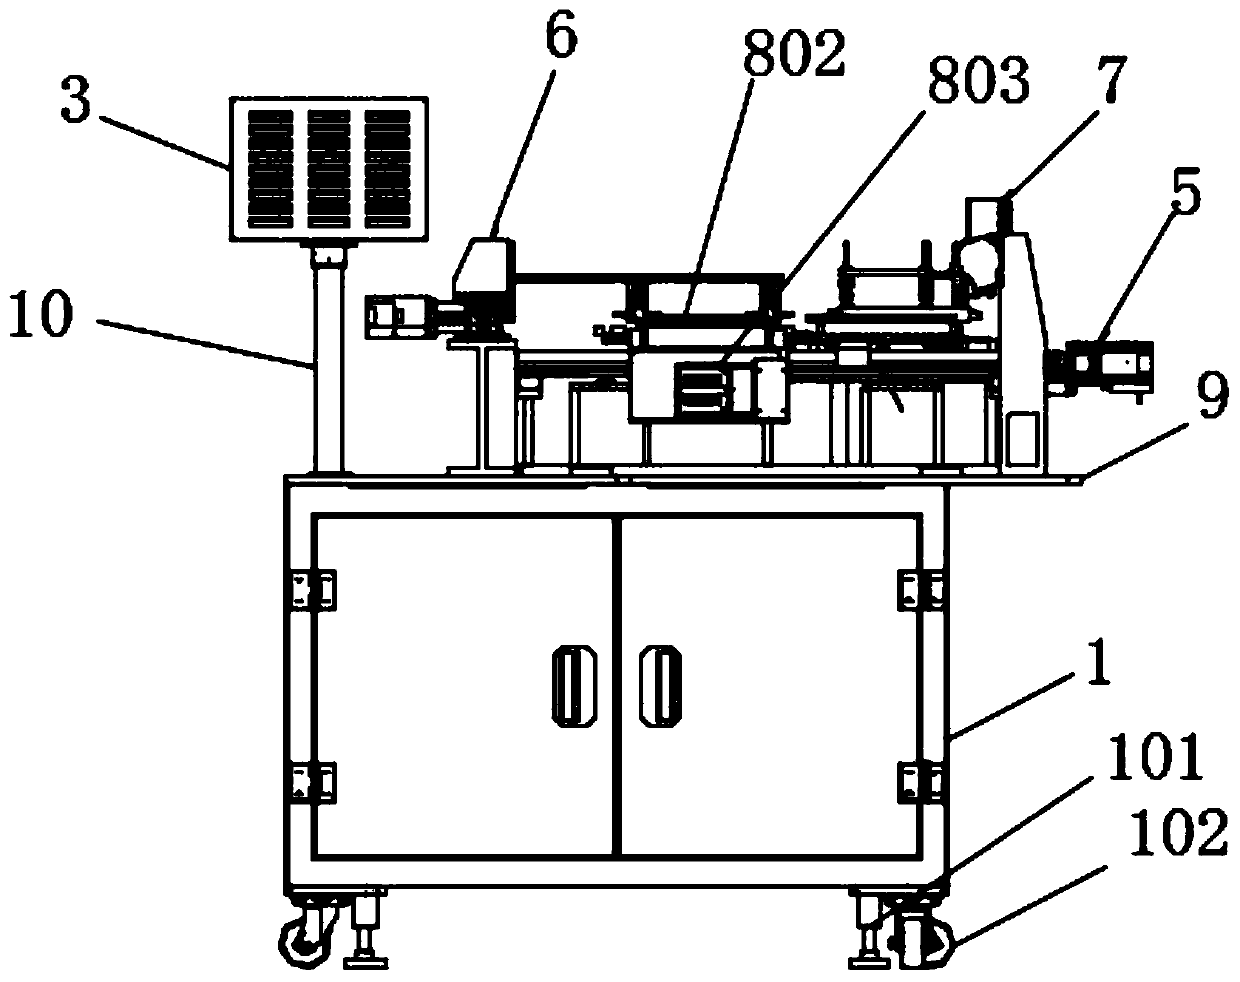 Integrated device for processing solar cell backboard film